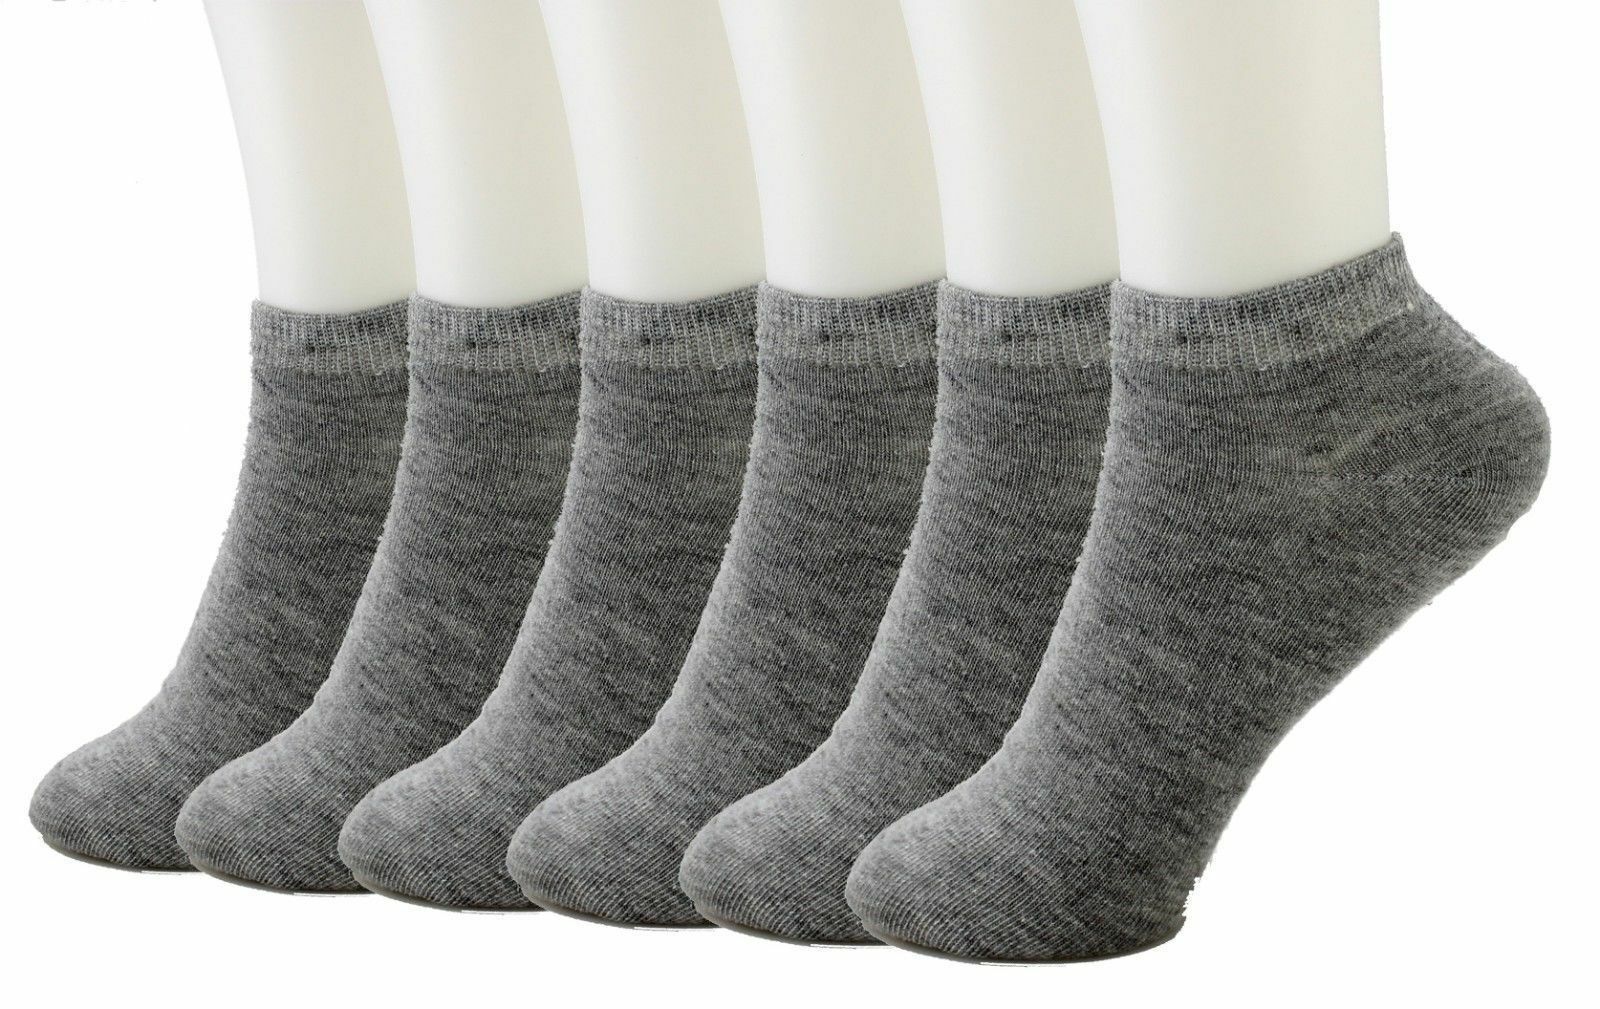 12 Packs Ankle Cool Socks Sport Mens Womens Size 10-13 Low Cut Lot Nwt#70033gray